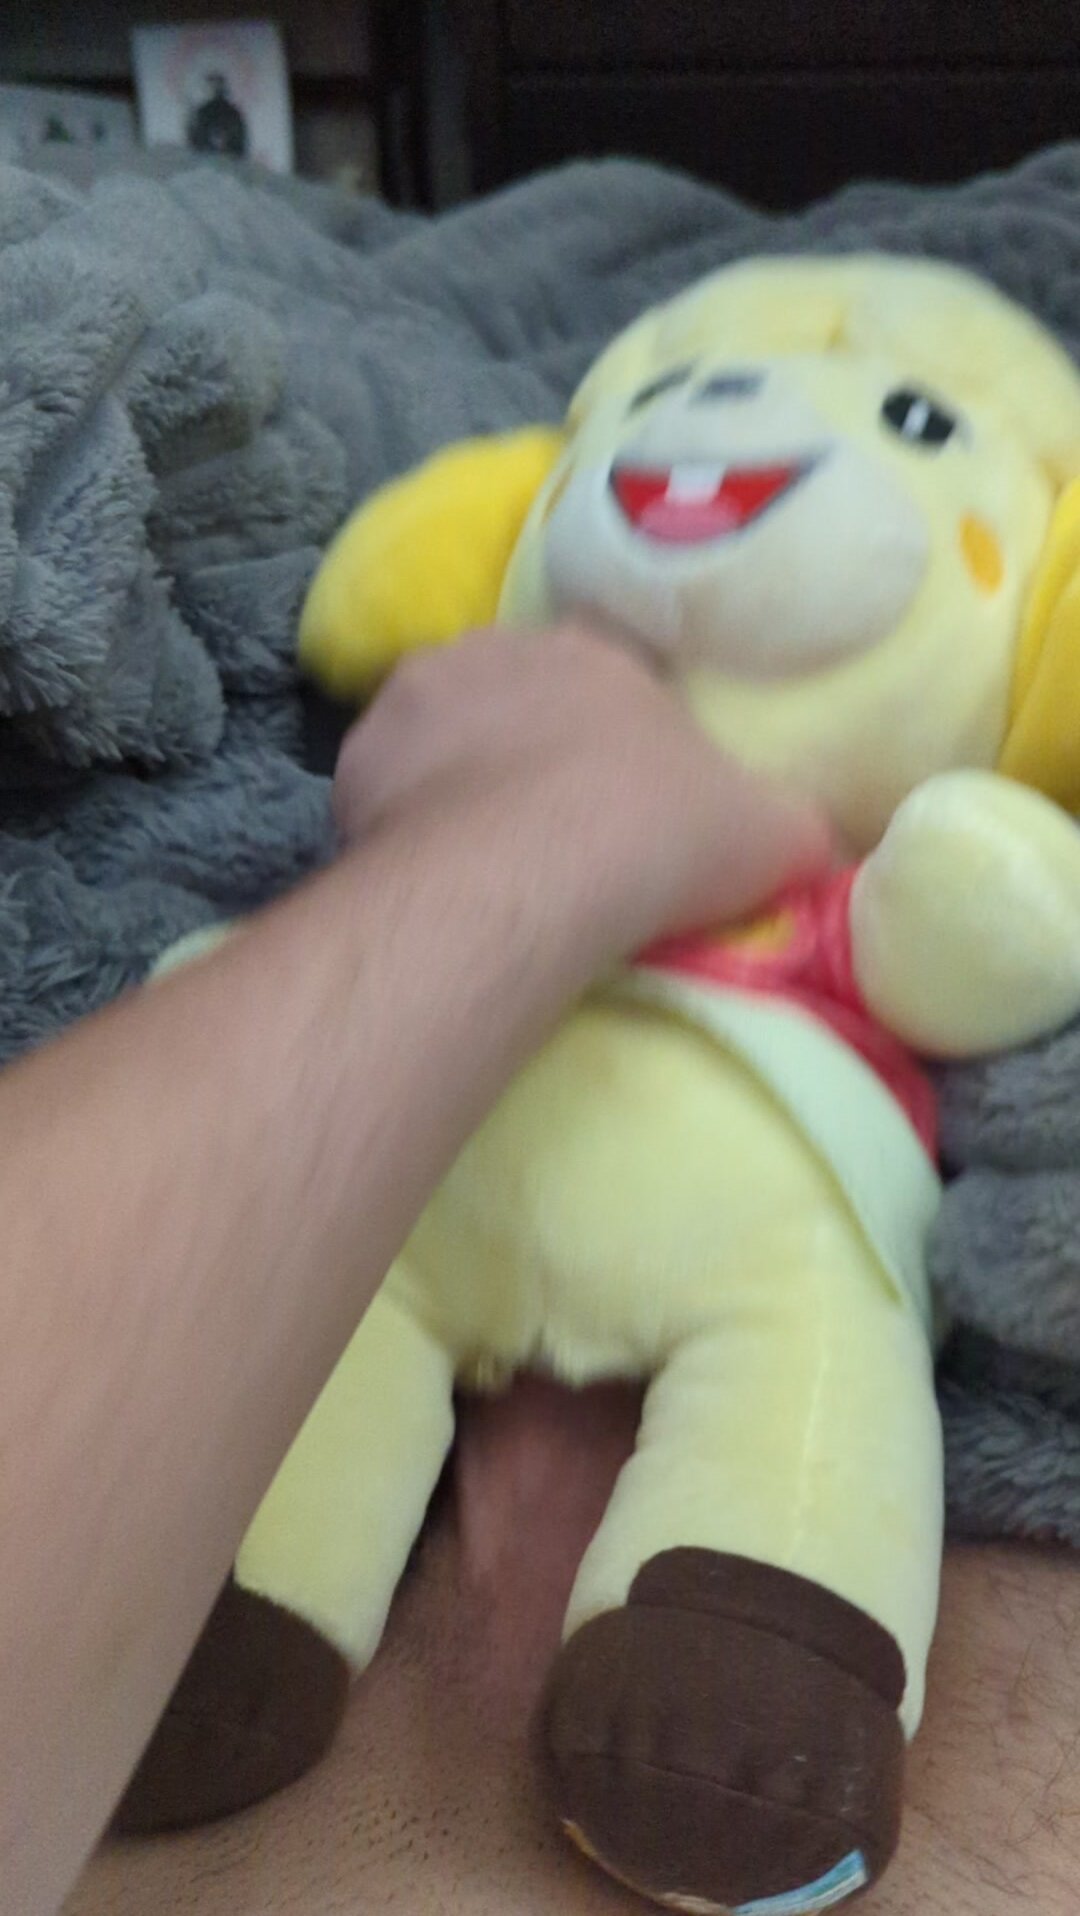 Isabelle gets fucked in the pussy